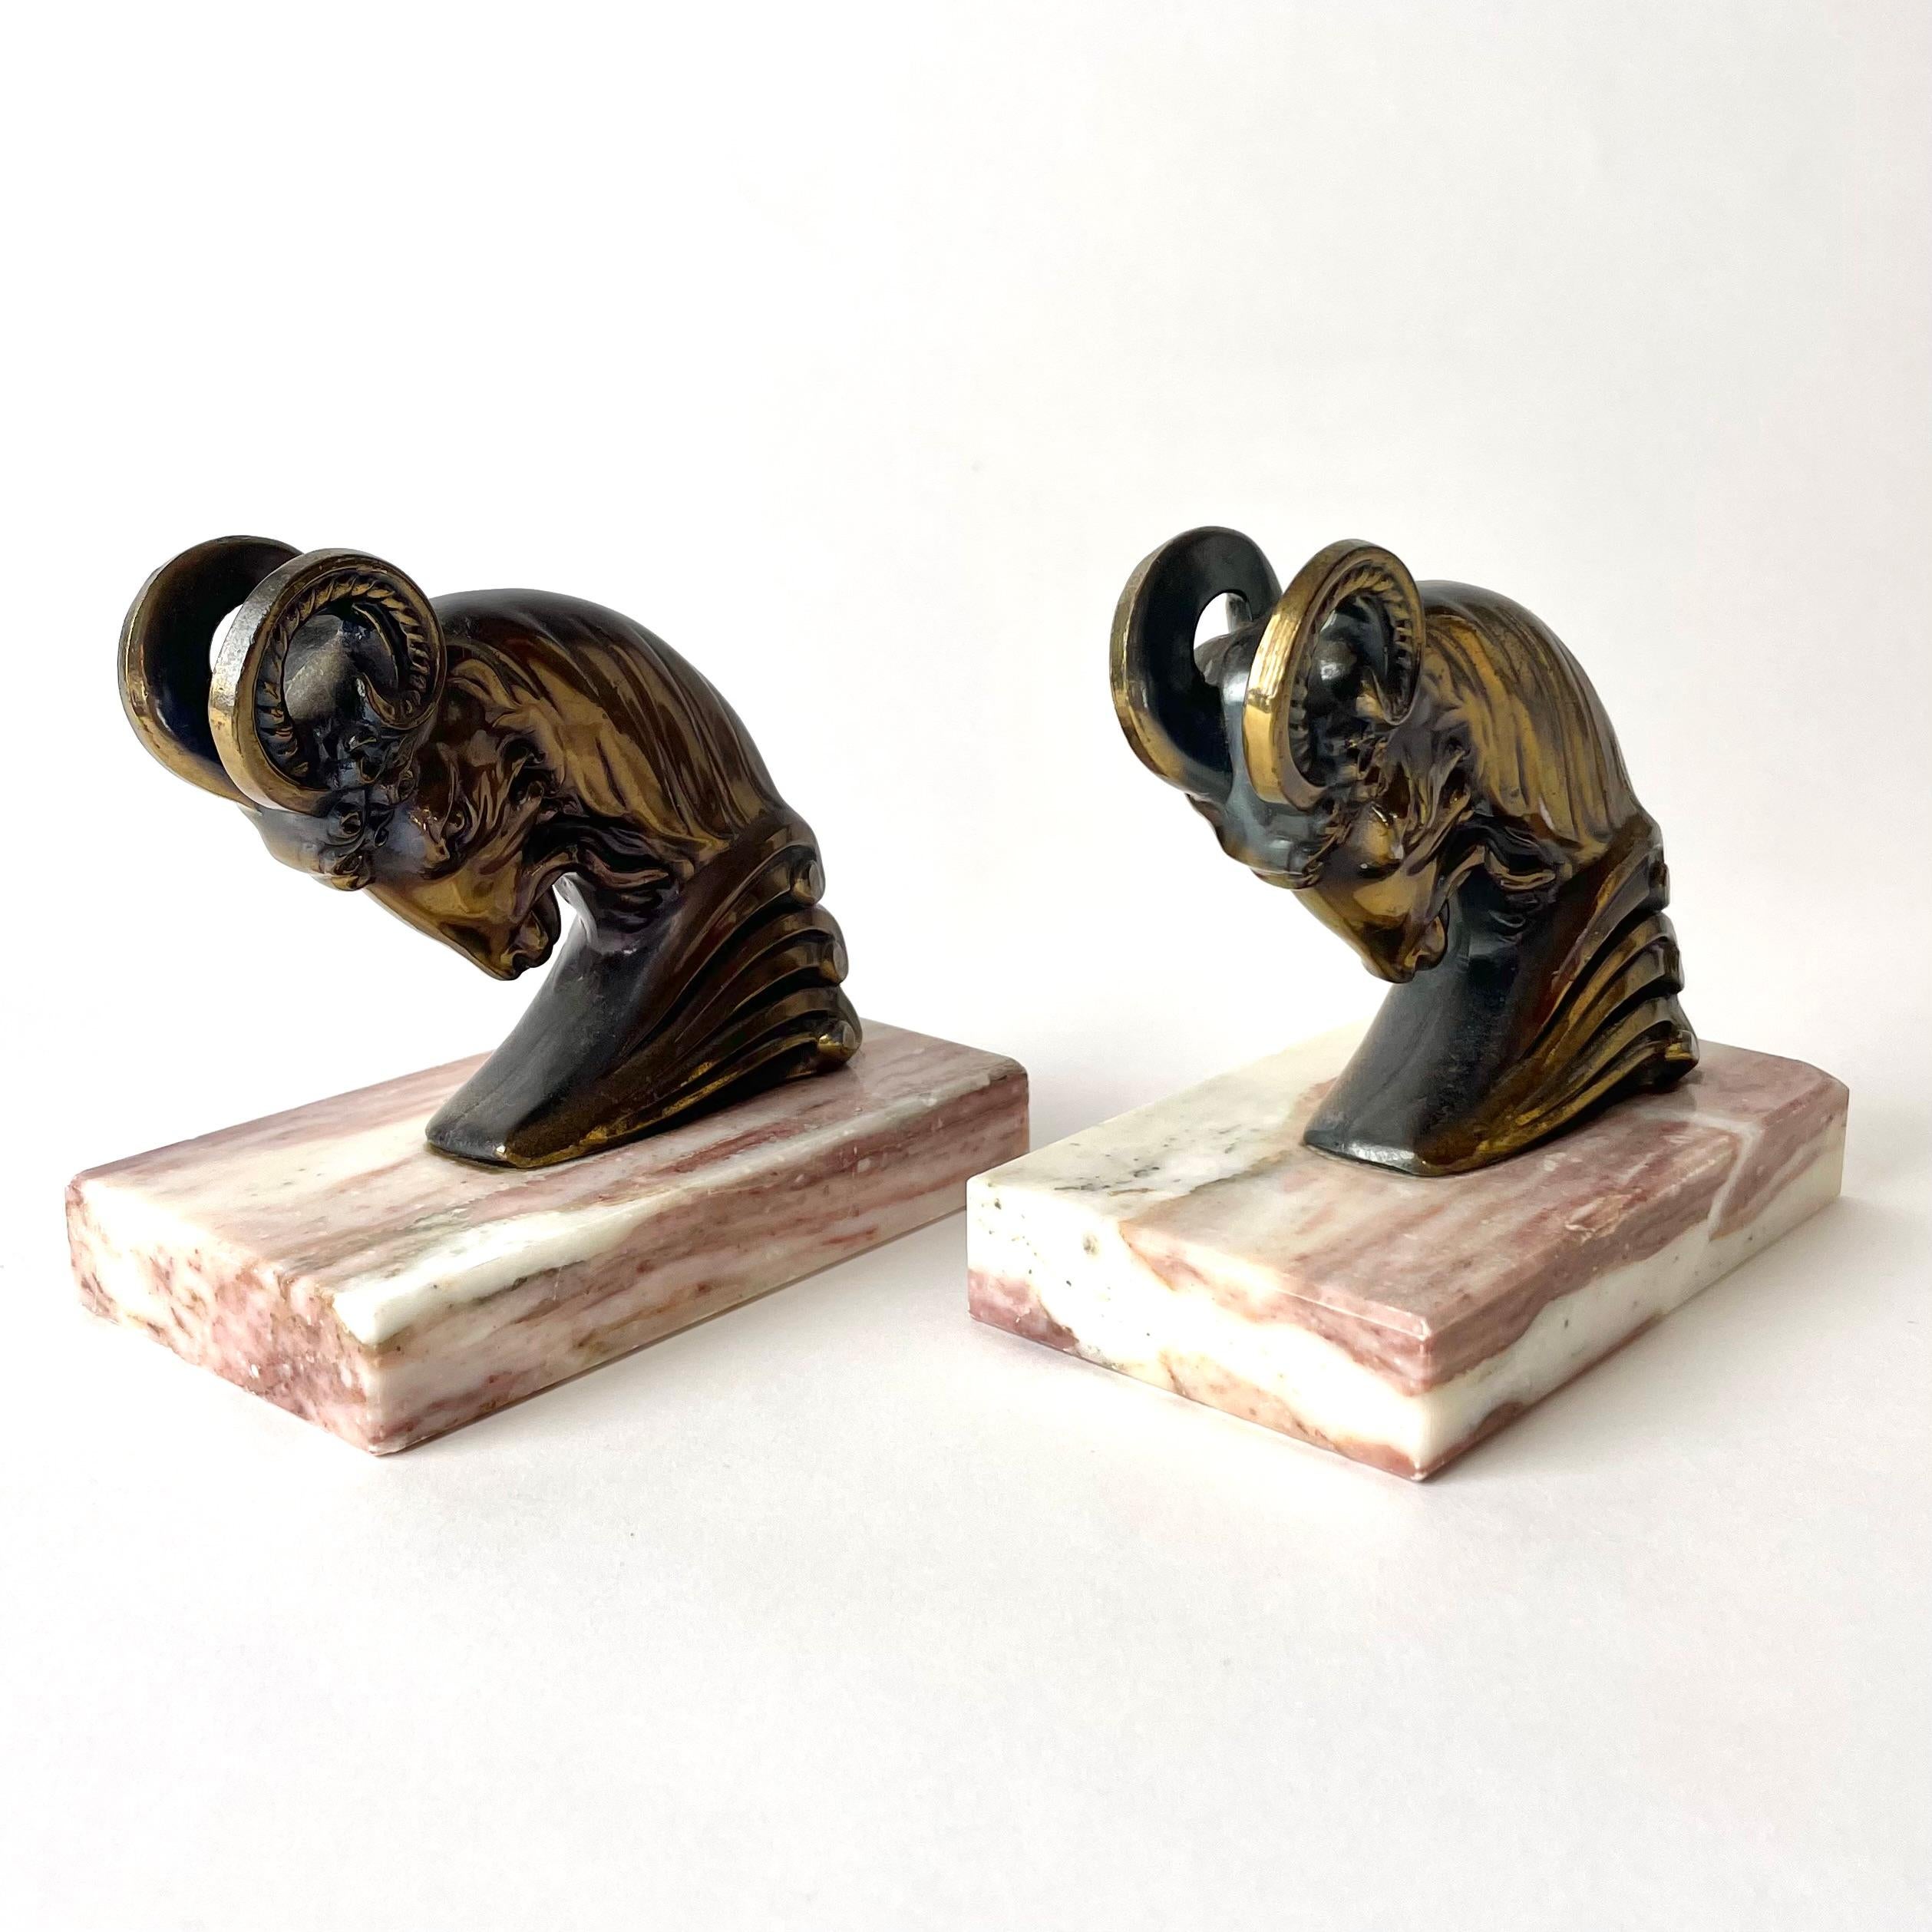 Patinated Pair of Art Deco Bookends from the 1930s with very period and powerful rams. For Sale